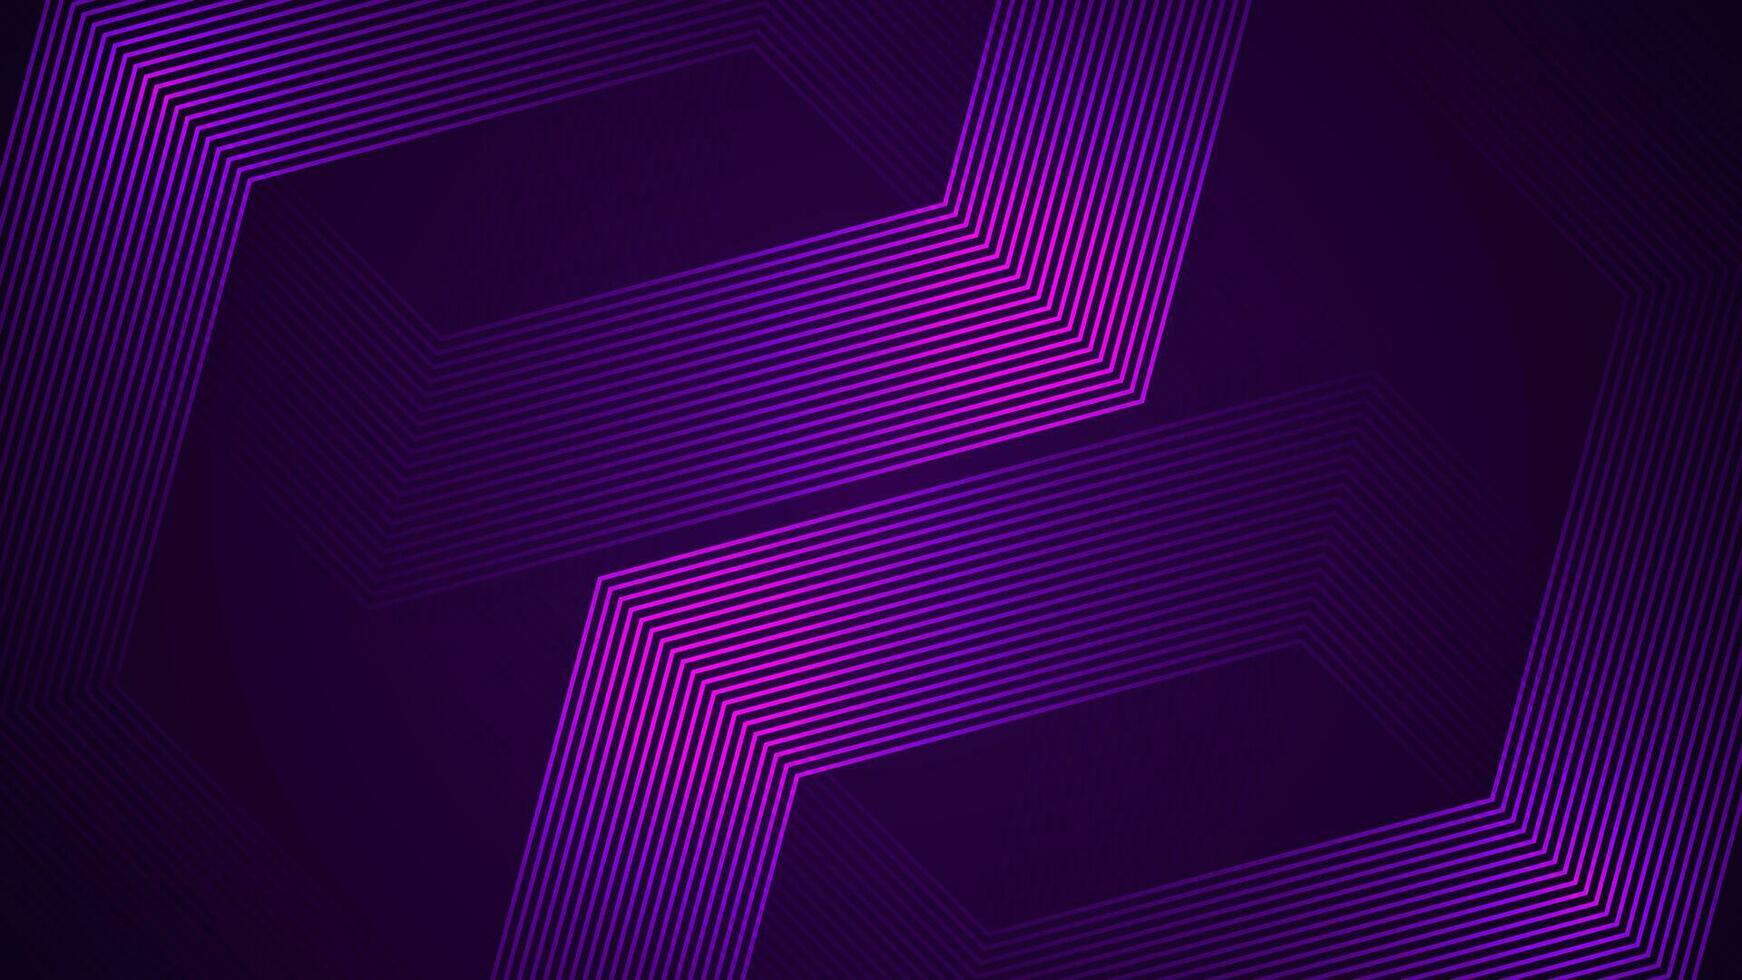 Dark violet simple abstract background with lines in a geometric style as the main element. vector